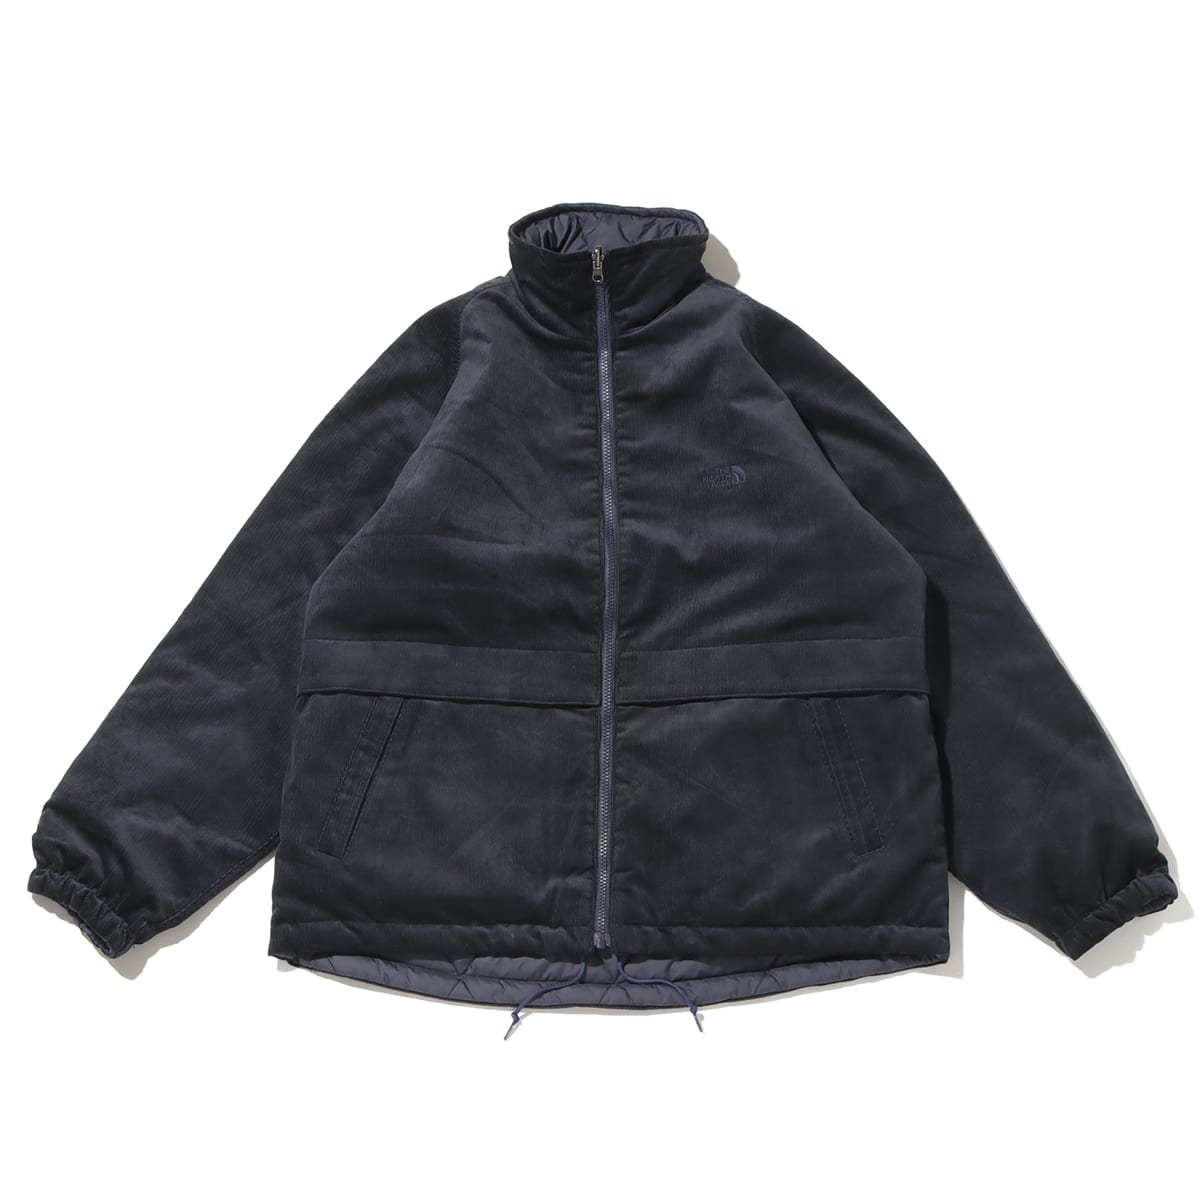 THE NORTH FACE PURPLE LABEL Corduroy Field Reversible Jacket Navy